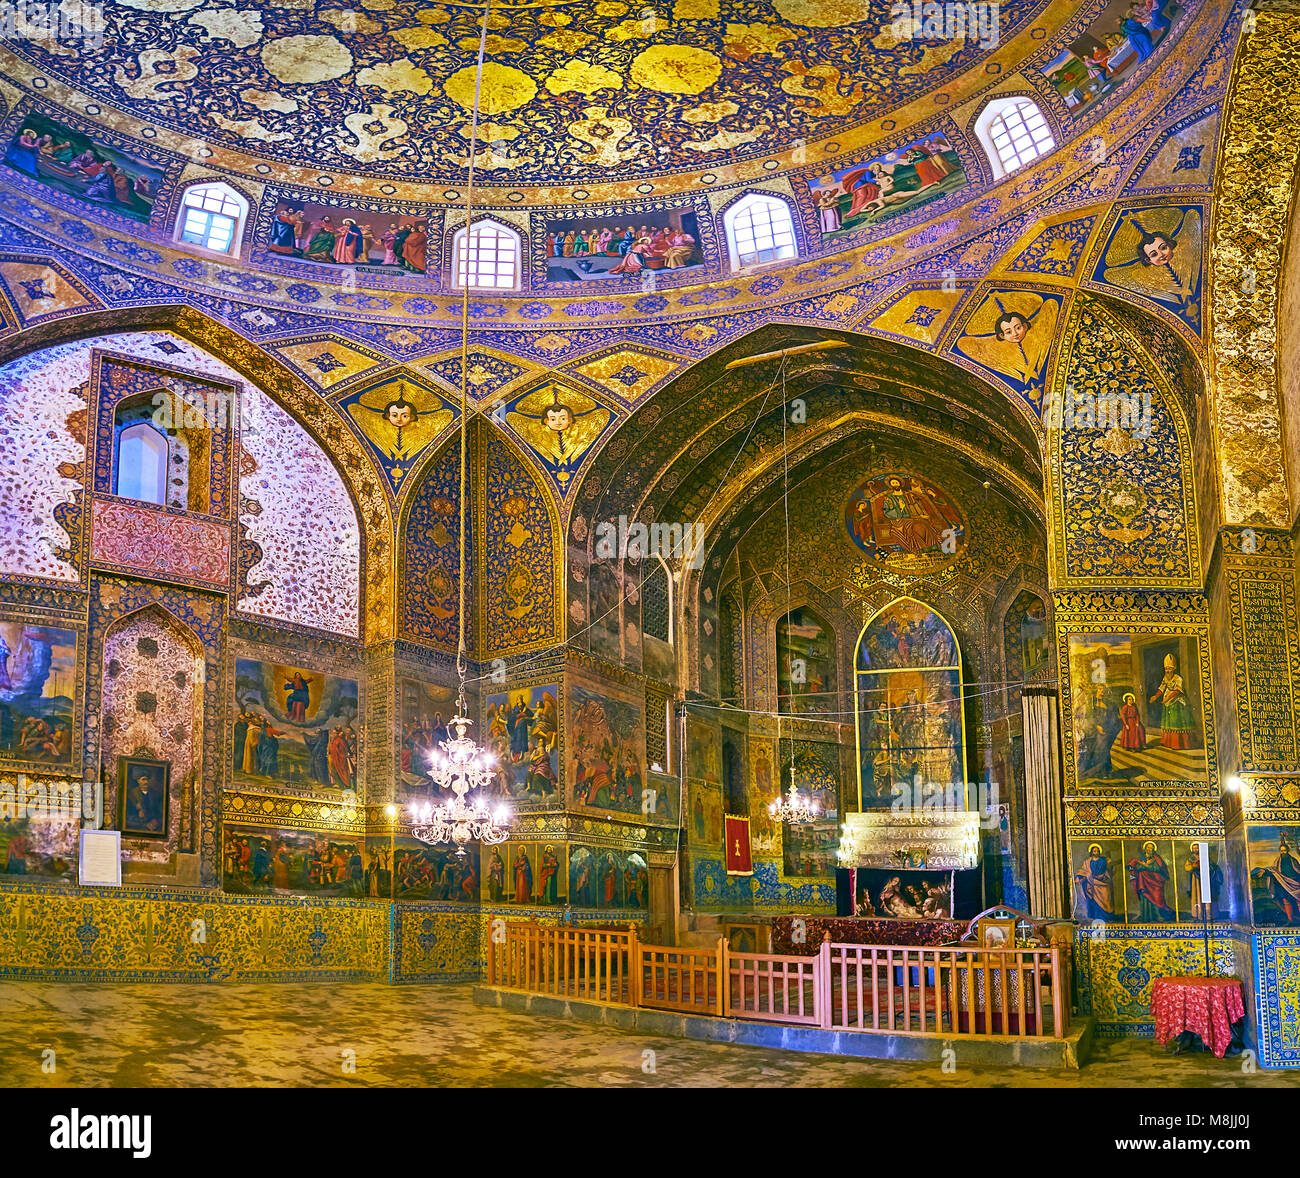 ISFAHAN, IRAN - OCTOBER 20,2017: Panorama of Armenian Orthodox Bethlehem Church with altar and side walls decorated with golden patterns and colorfed  Stock Photo